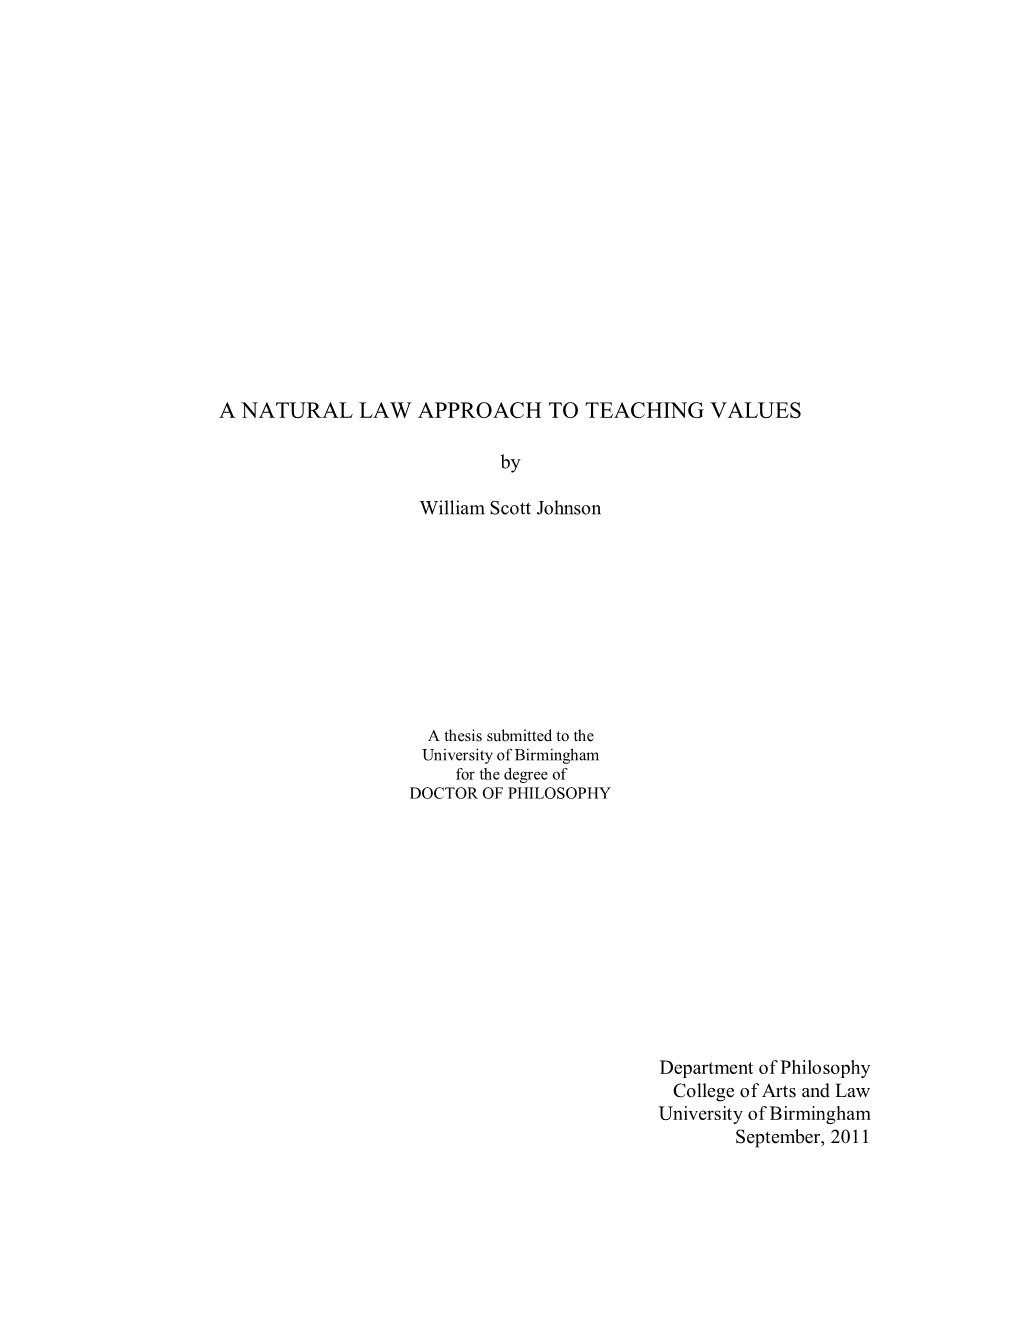 A Natural Law Approach to Teaching Values Corrected